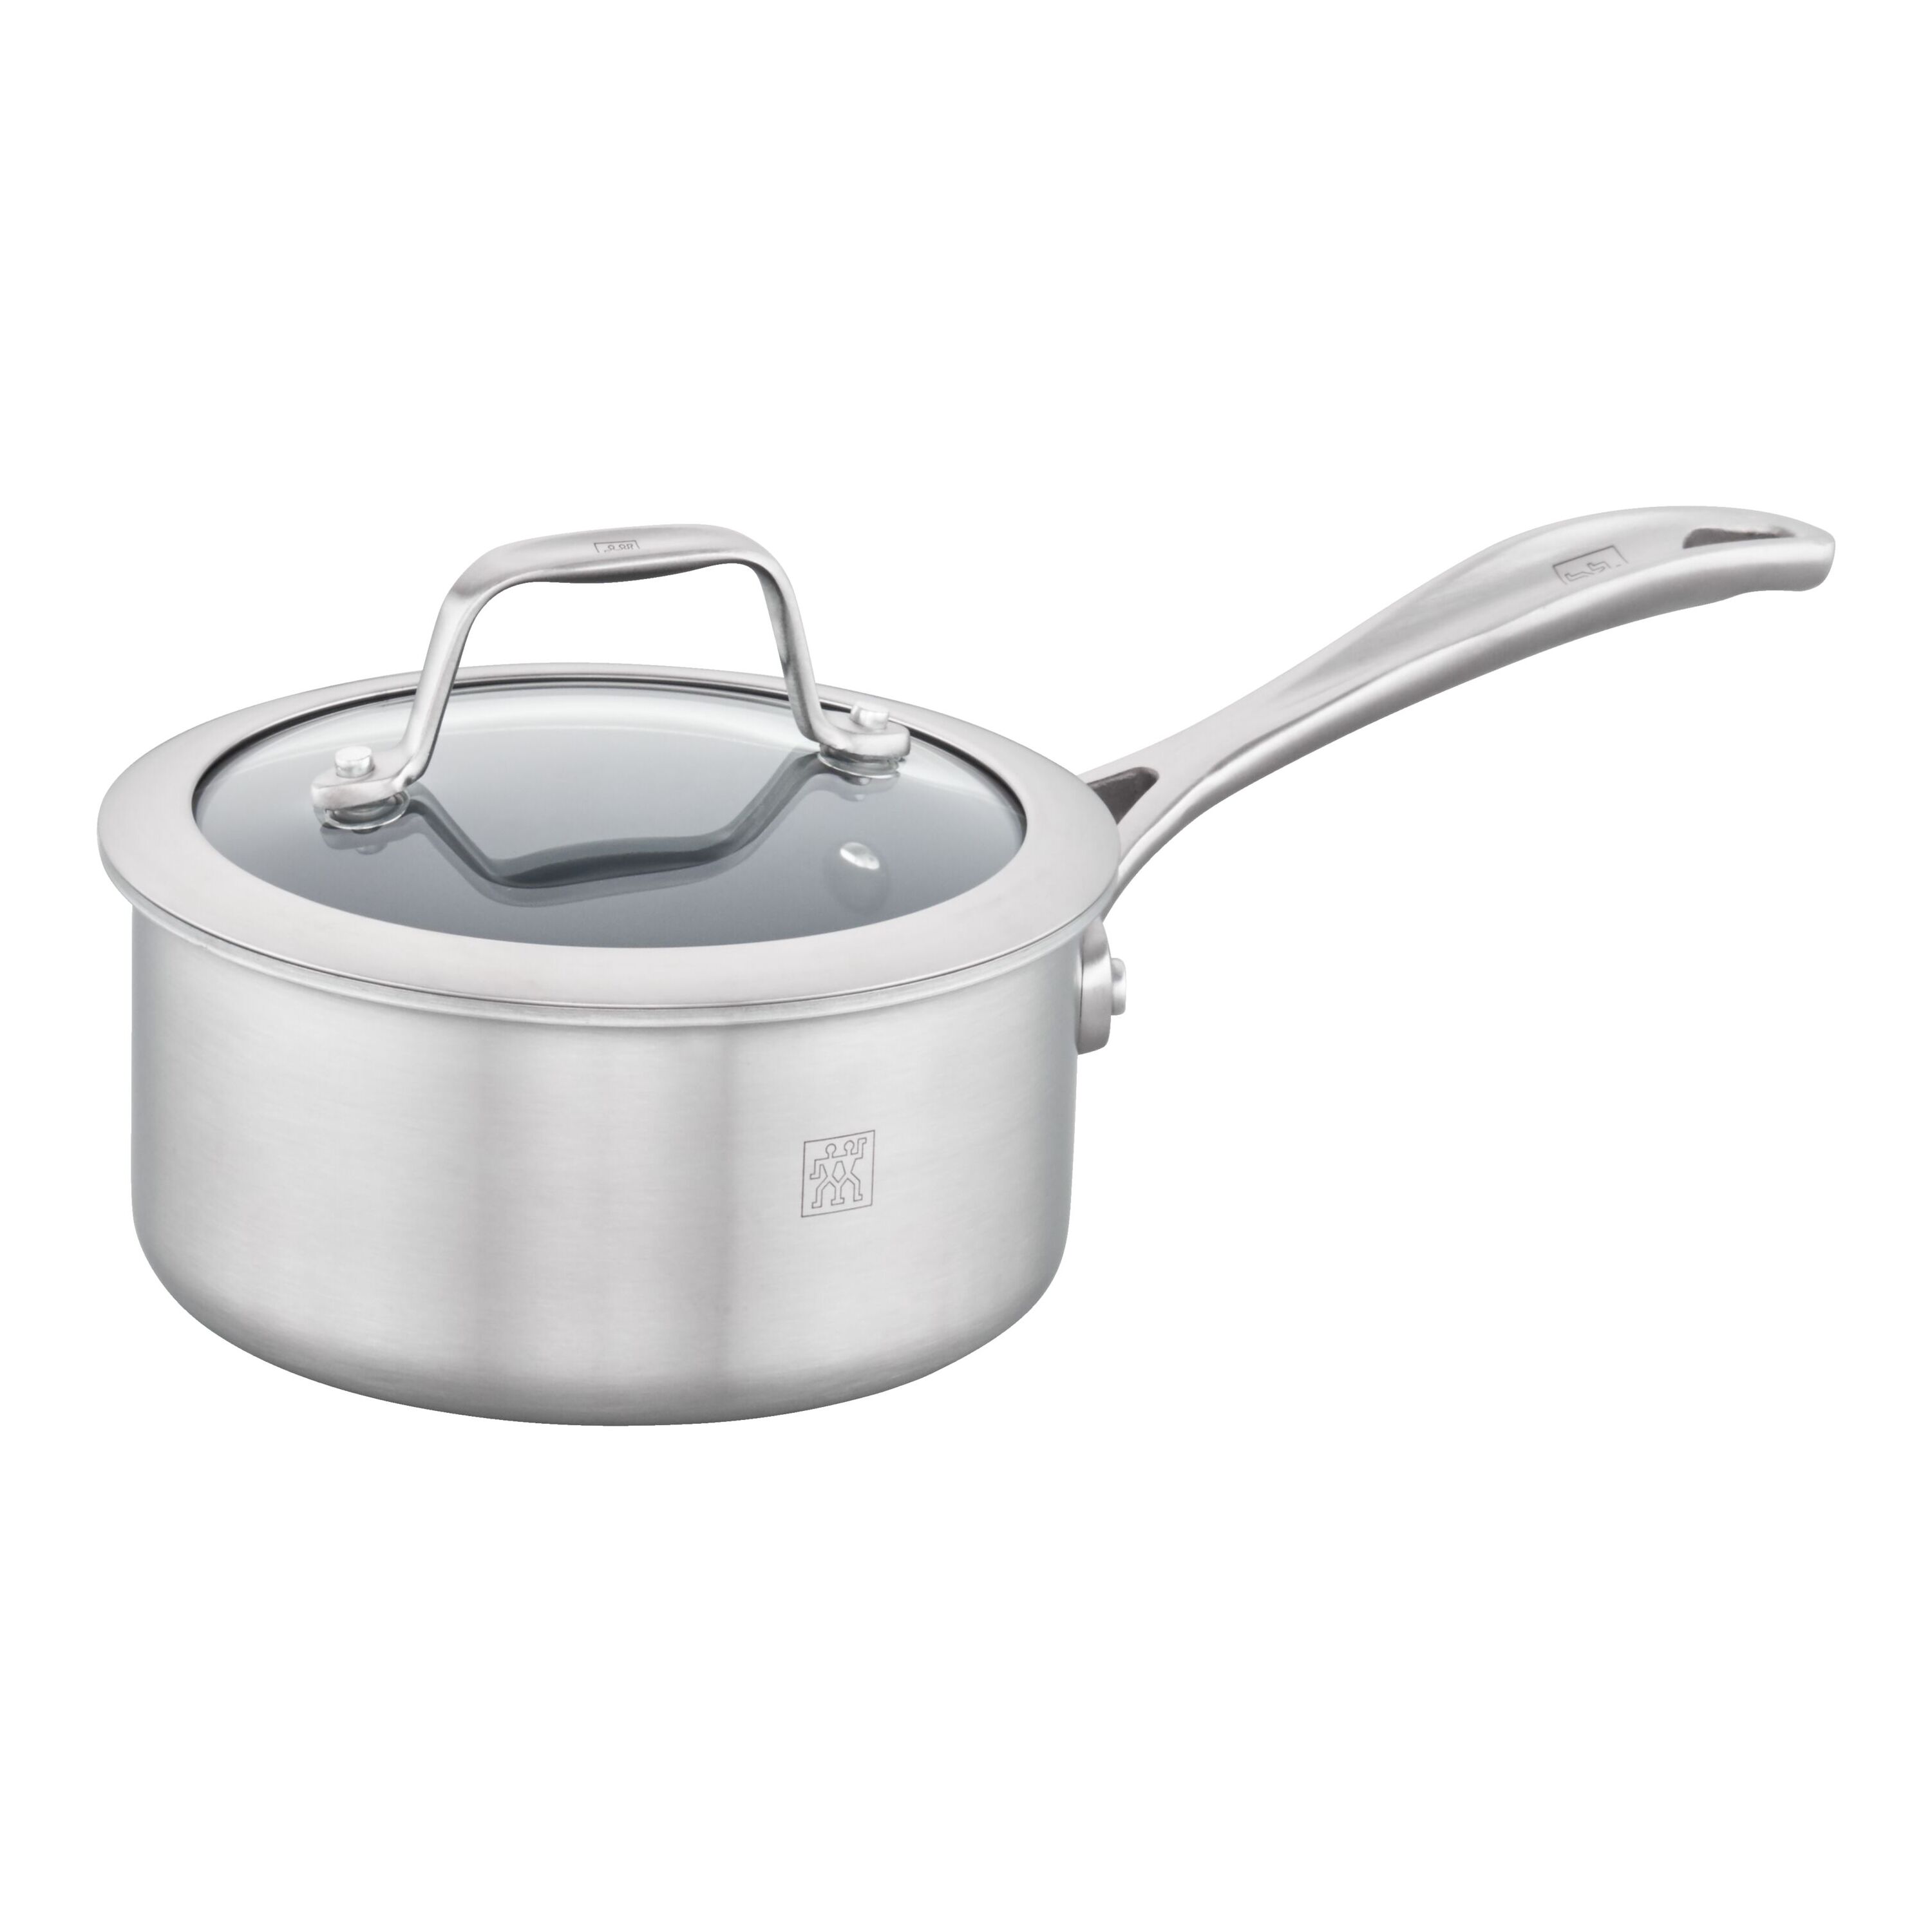 Zwilling Spirit 3-Ply 1-qt Stainless Steel Saucepan